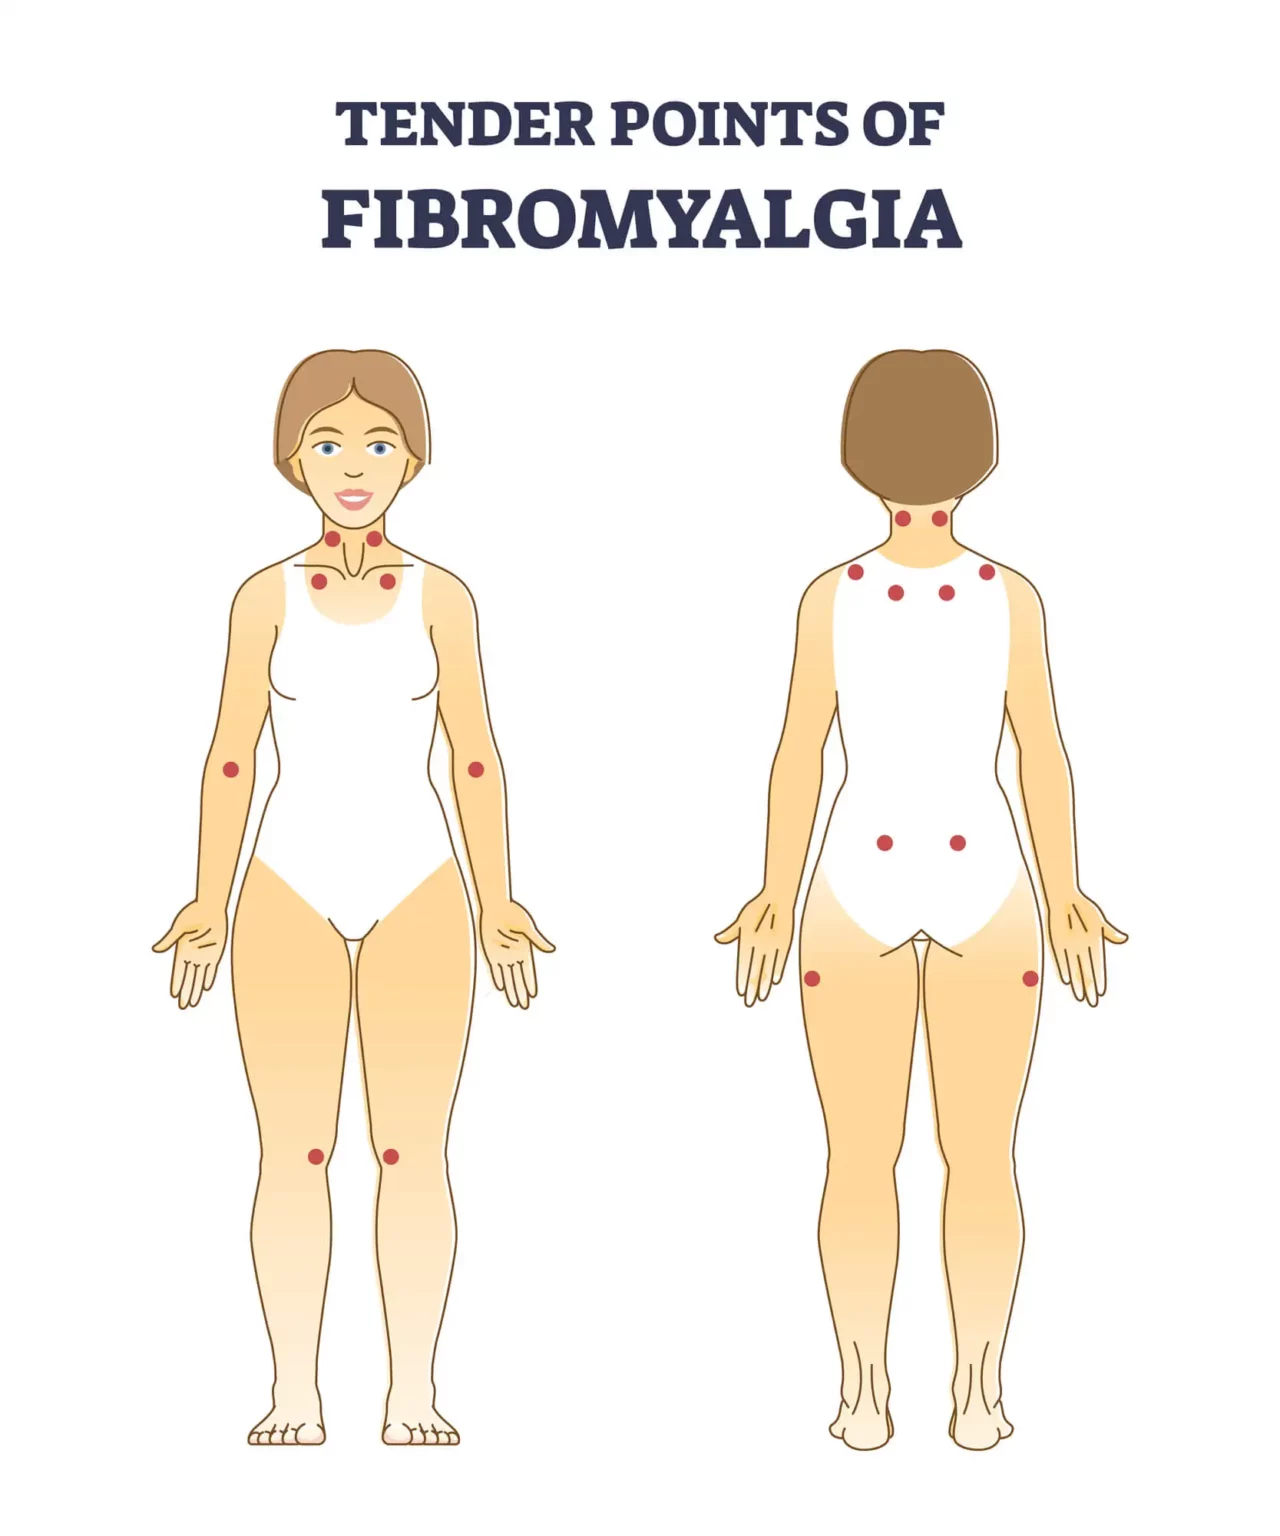 Fibromyalgia – The Complete Injury Guide - Vive Health